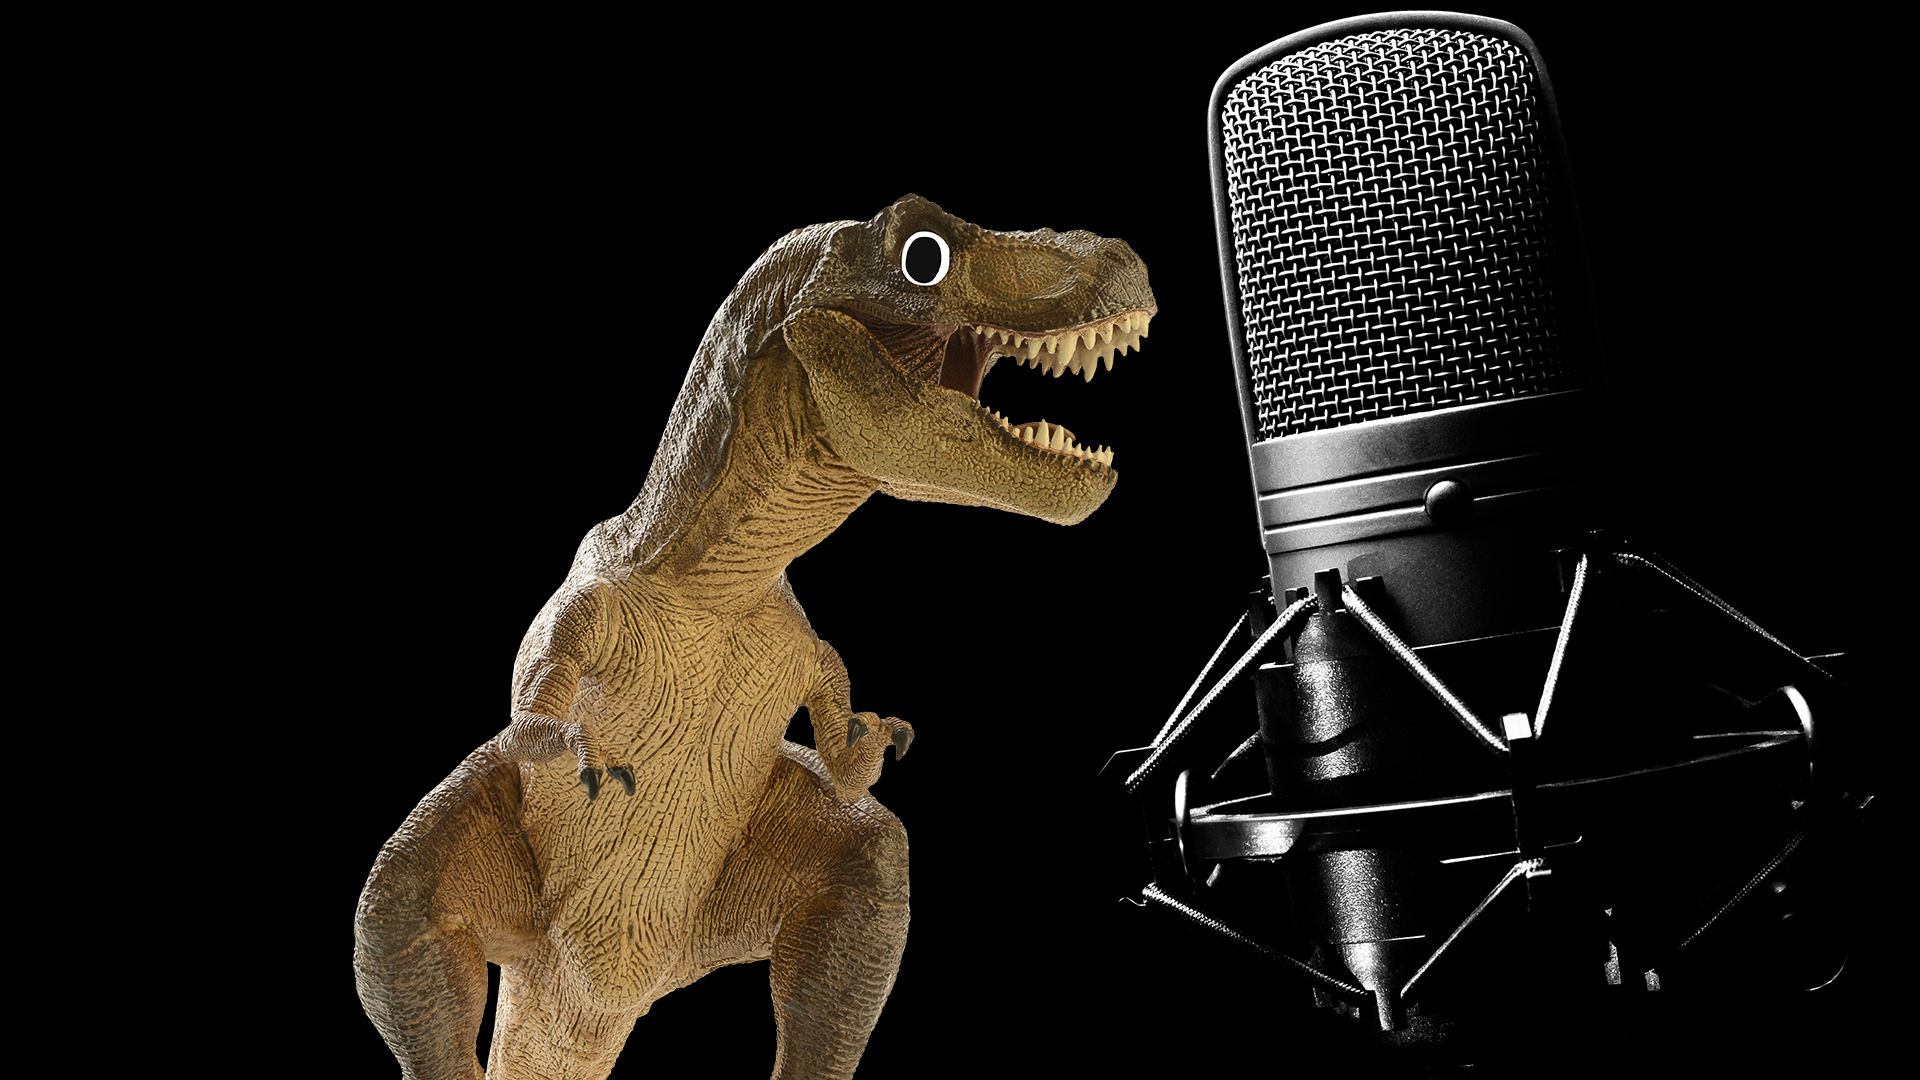 Dinosaur and microphone on black background 